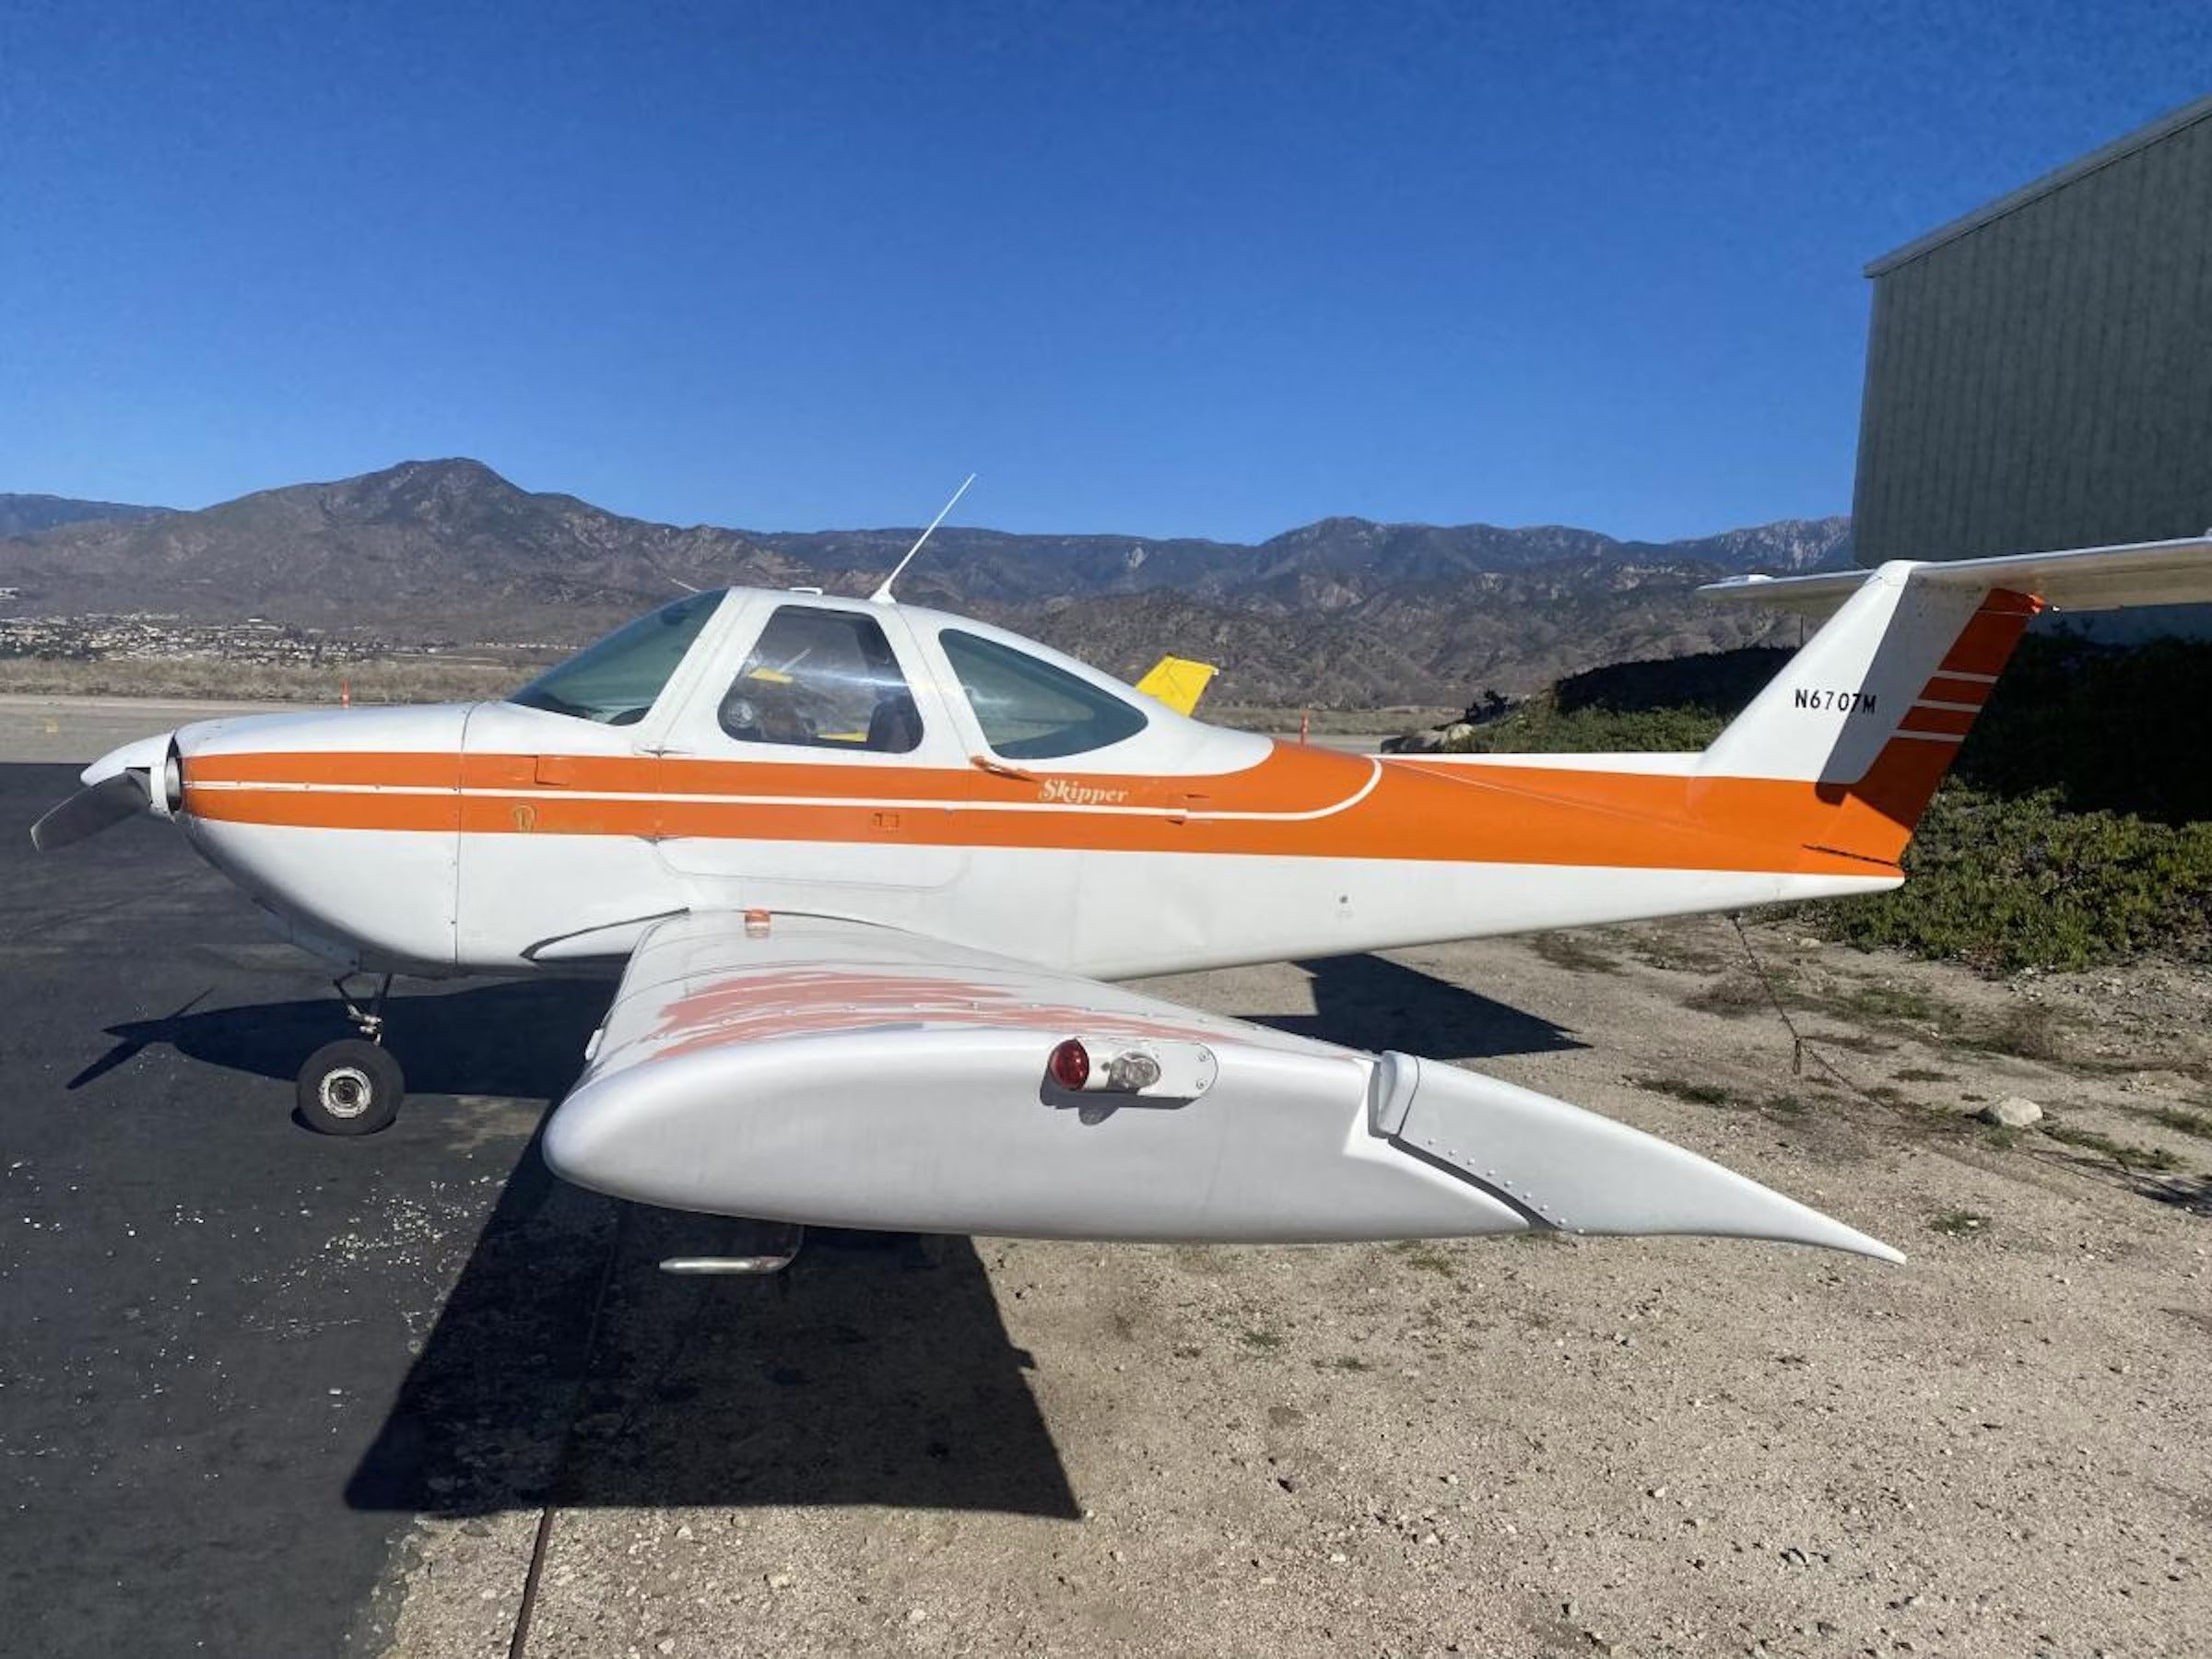 This 1979 Beechcraft 77 Skipper Is a Rare, Roomy ‘AircraftForSale’ Top Pick